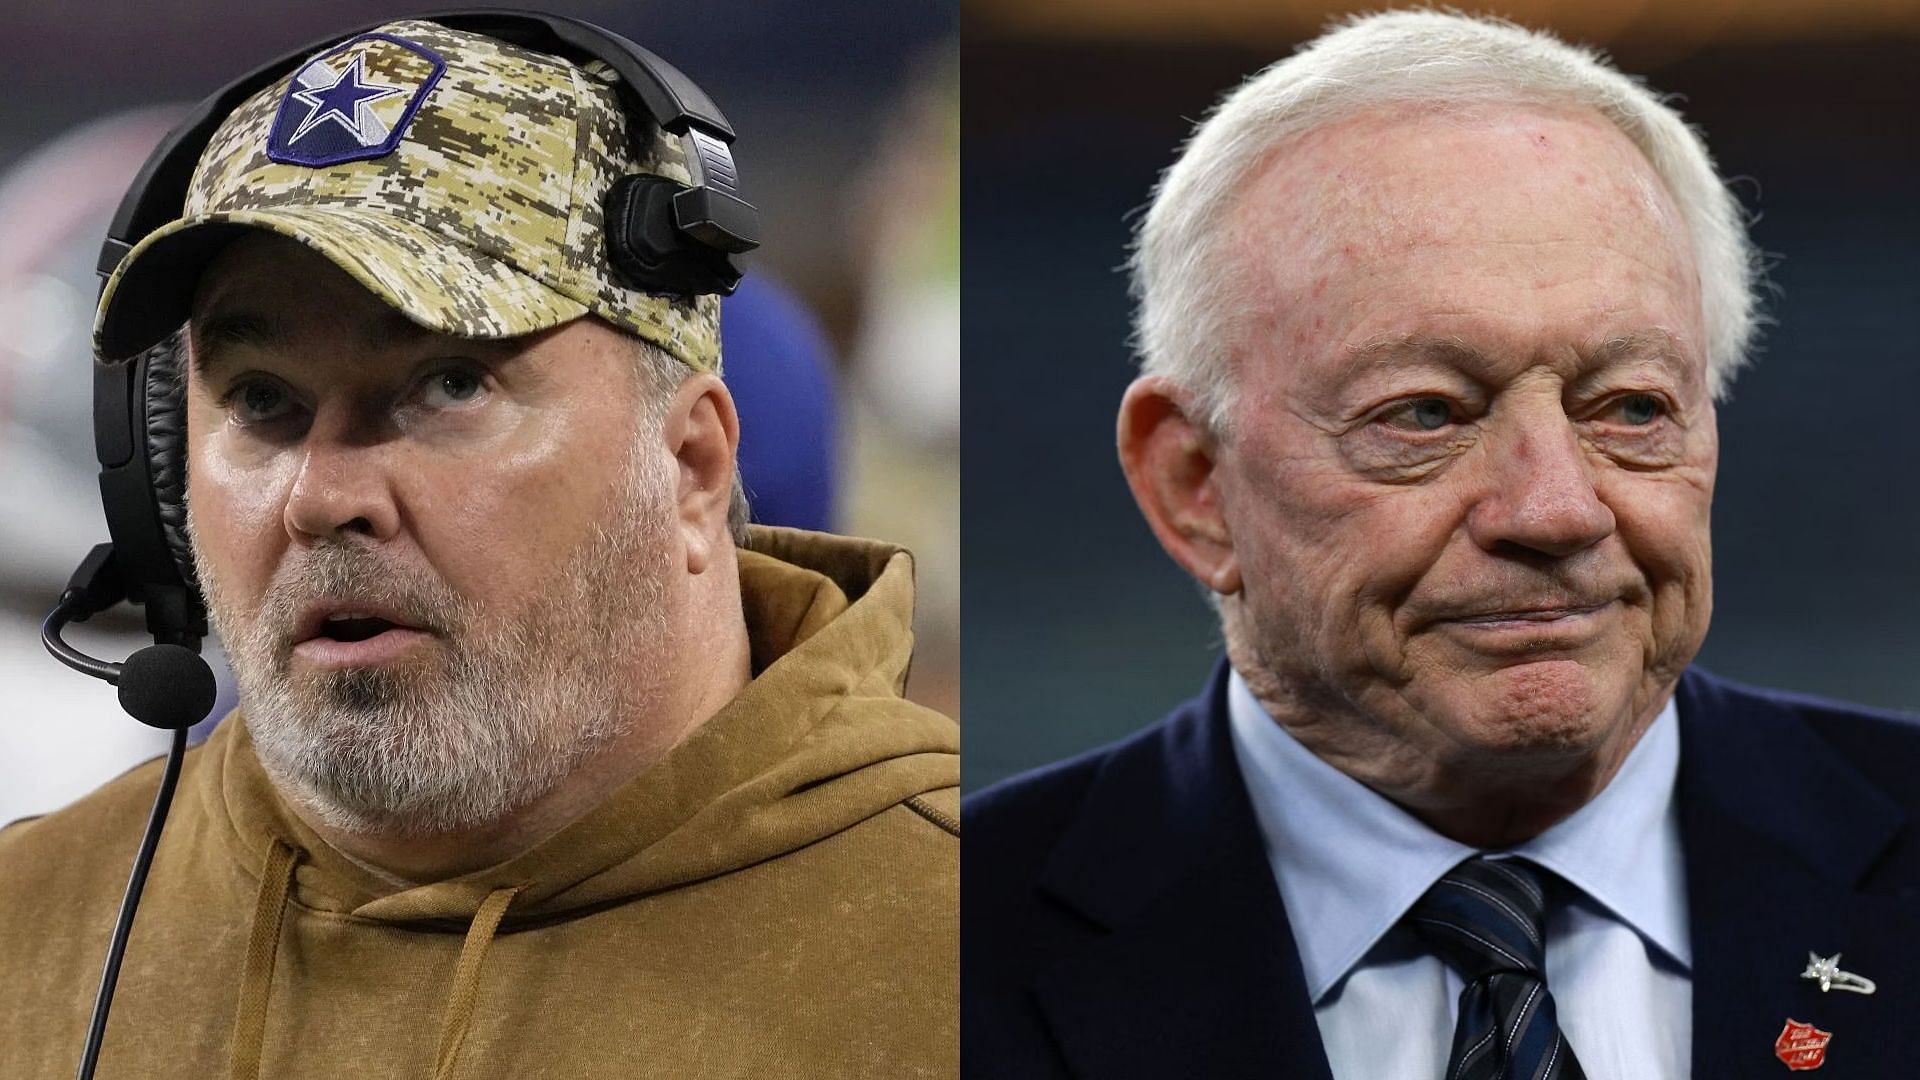 Dallas Cowboys head coach Mike McCarthy and team owner Jerry Jones